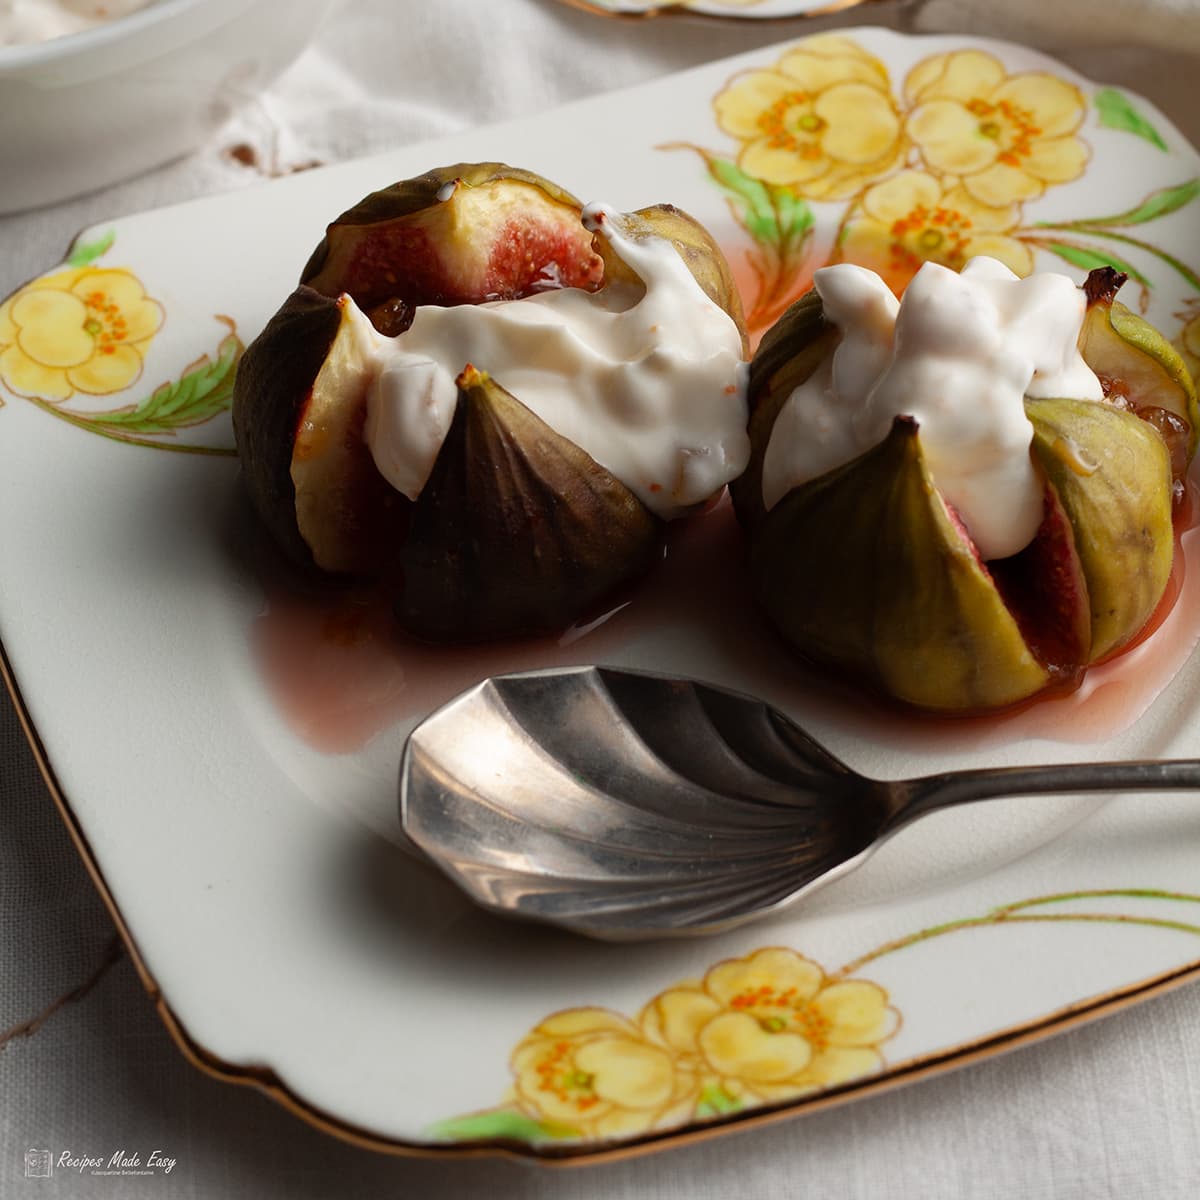 2 roasted figs topped with ginger and orange cream ion a dessert plate with a spoon.